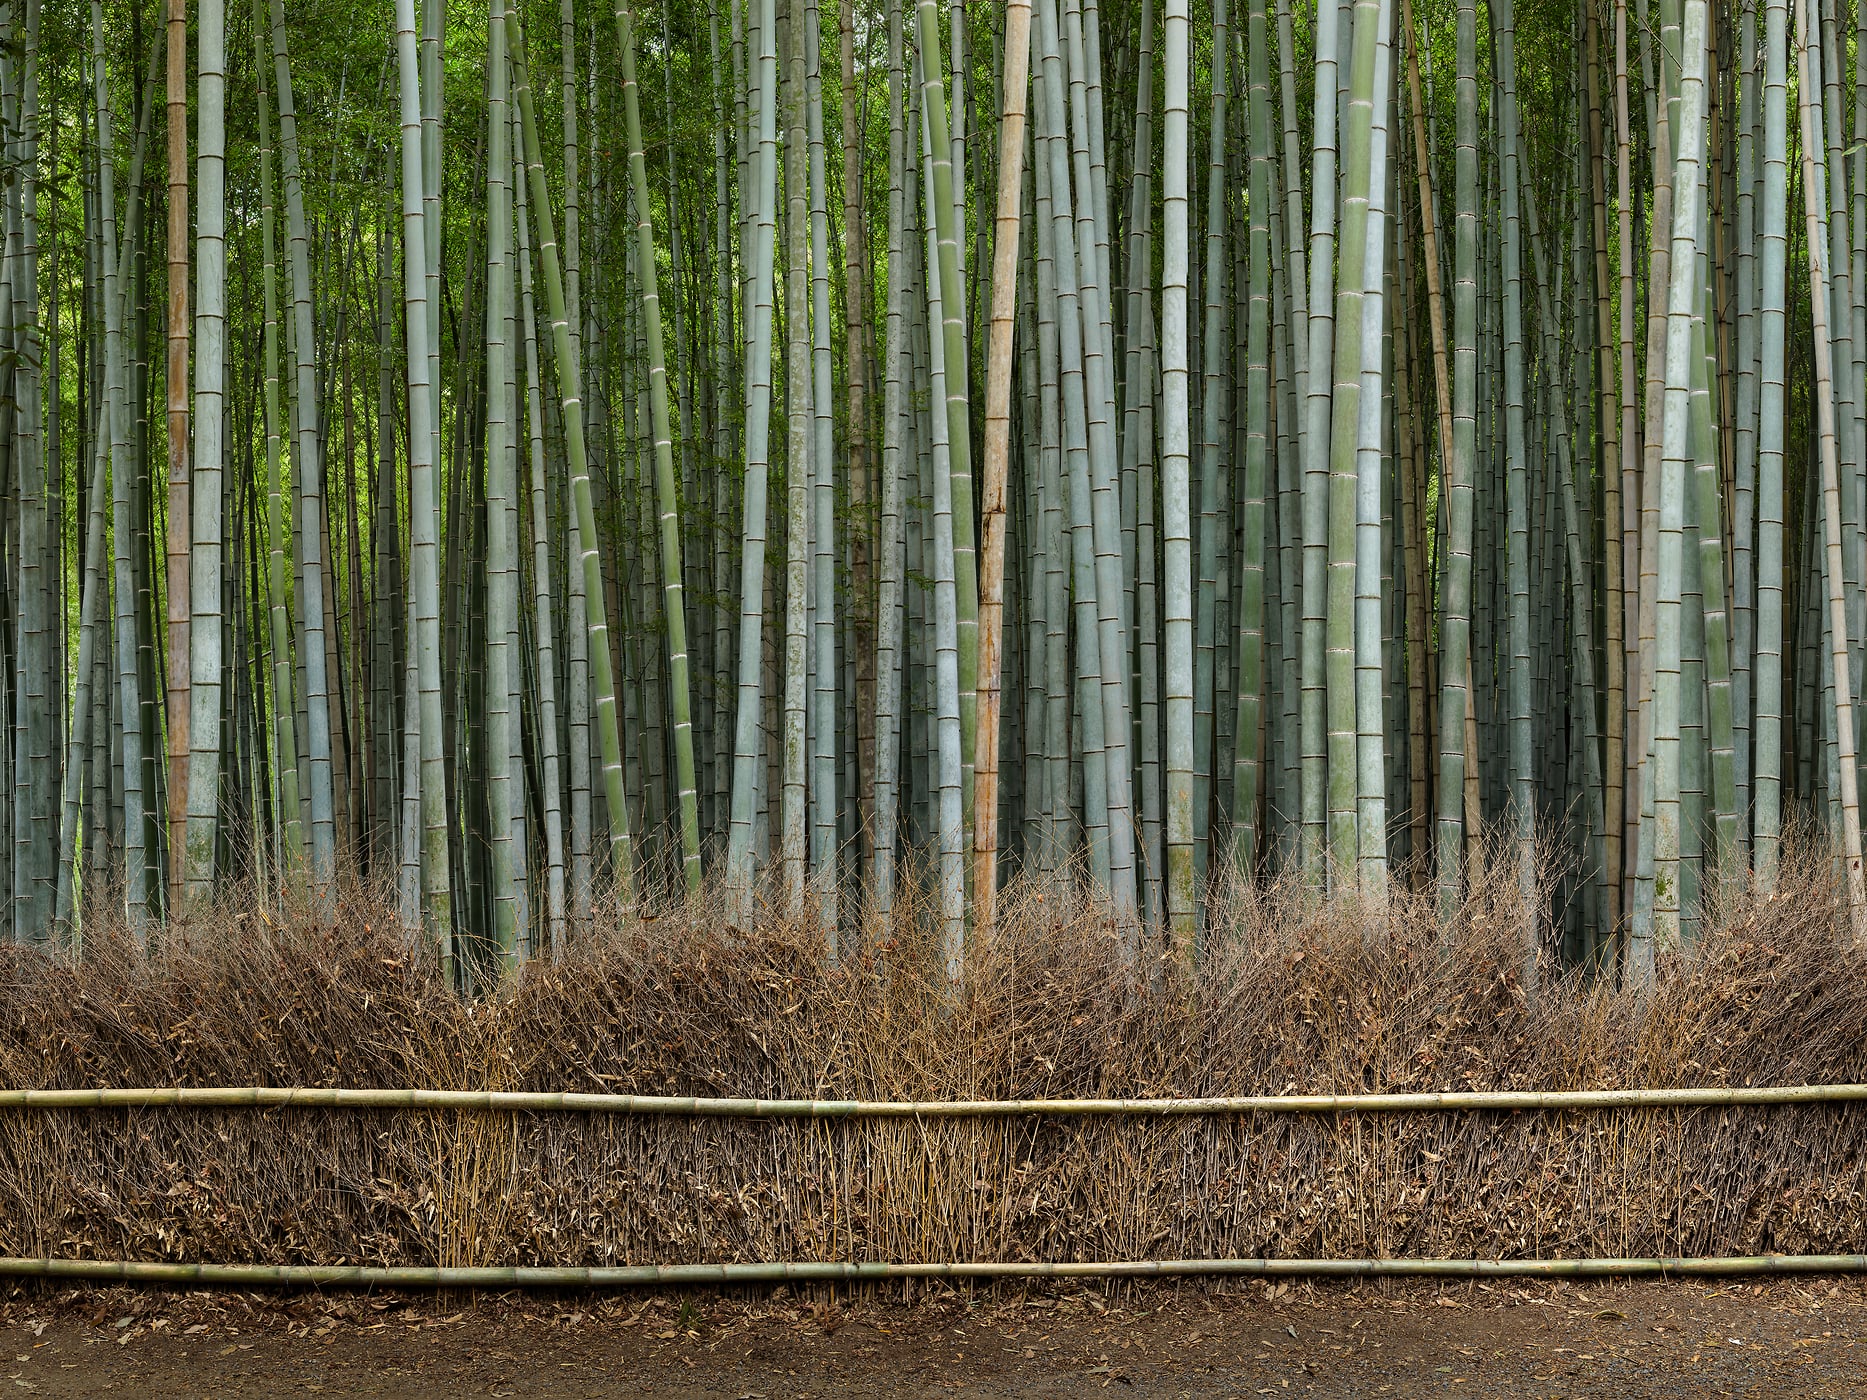 795 megapixels! A very high resolution, large-format VAST photo art print of a bamboo forest; nature photograph created by Scott Dimond in the Arashiyama Bamboo Grove in Ukyo Ward, Kyoto, Japan.